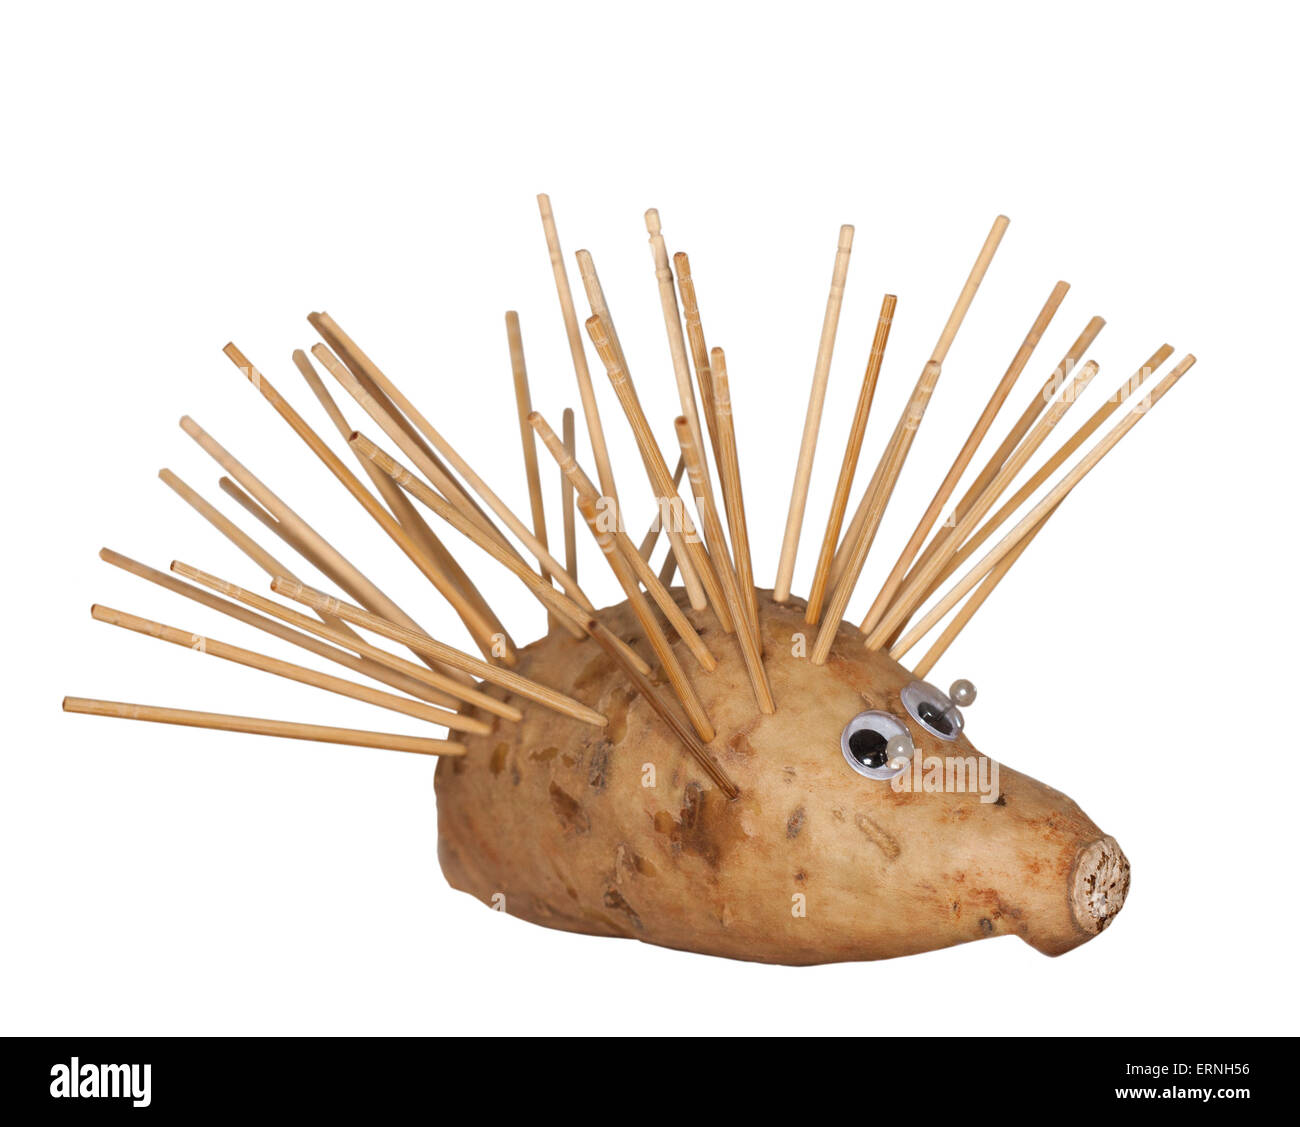 Hedgehog, porcupine or spiny echidna made from sweet potato with plastic eyes and mass of wooden spines on white background Stock Photo